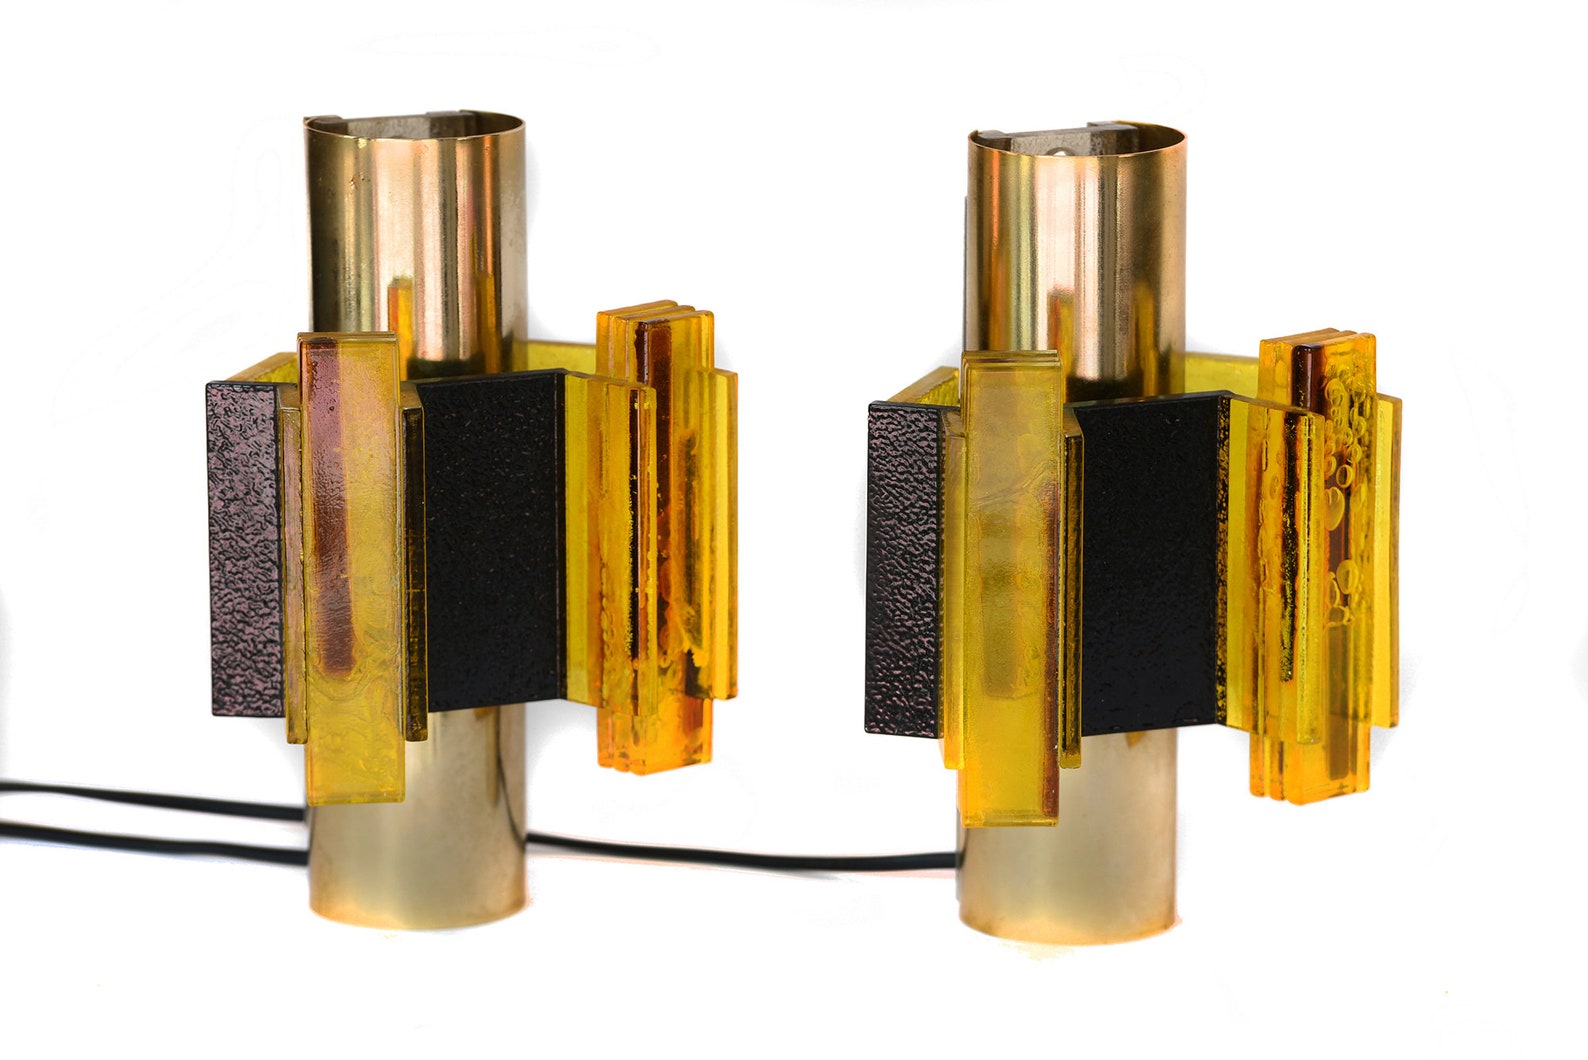 Pair of wall sconces 1008 by Claus Bolby for CEBO industries. Denmark 1960s